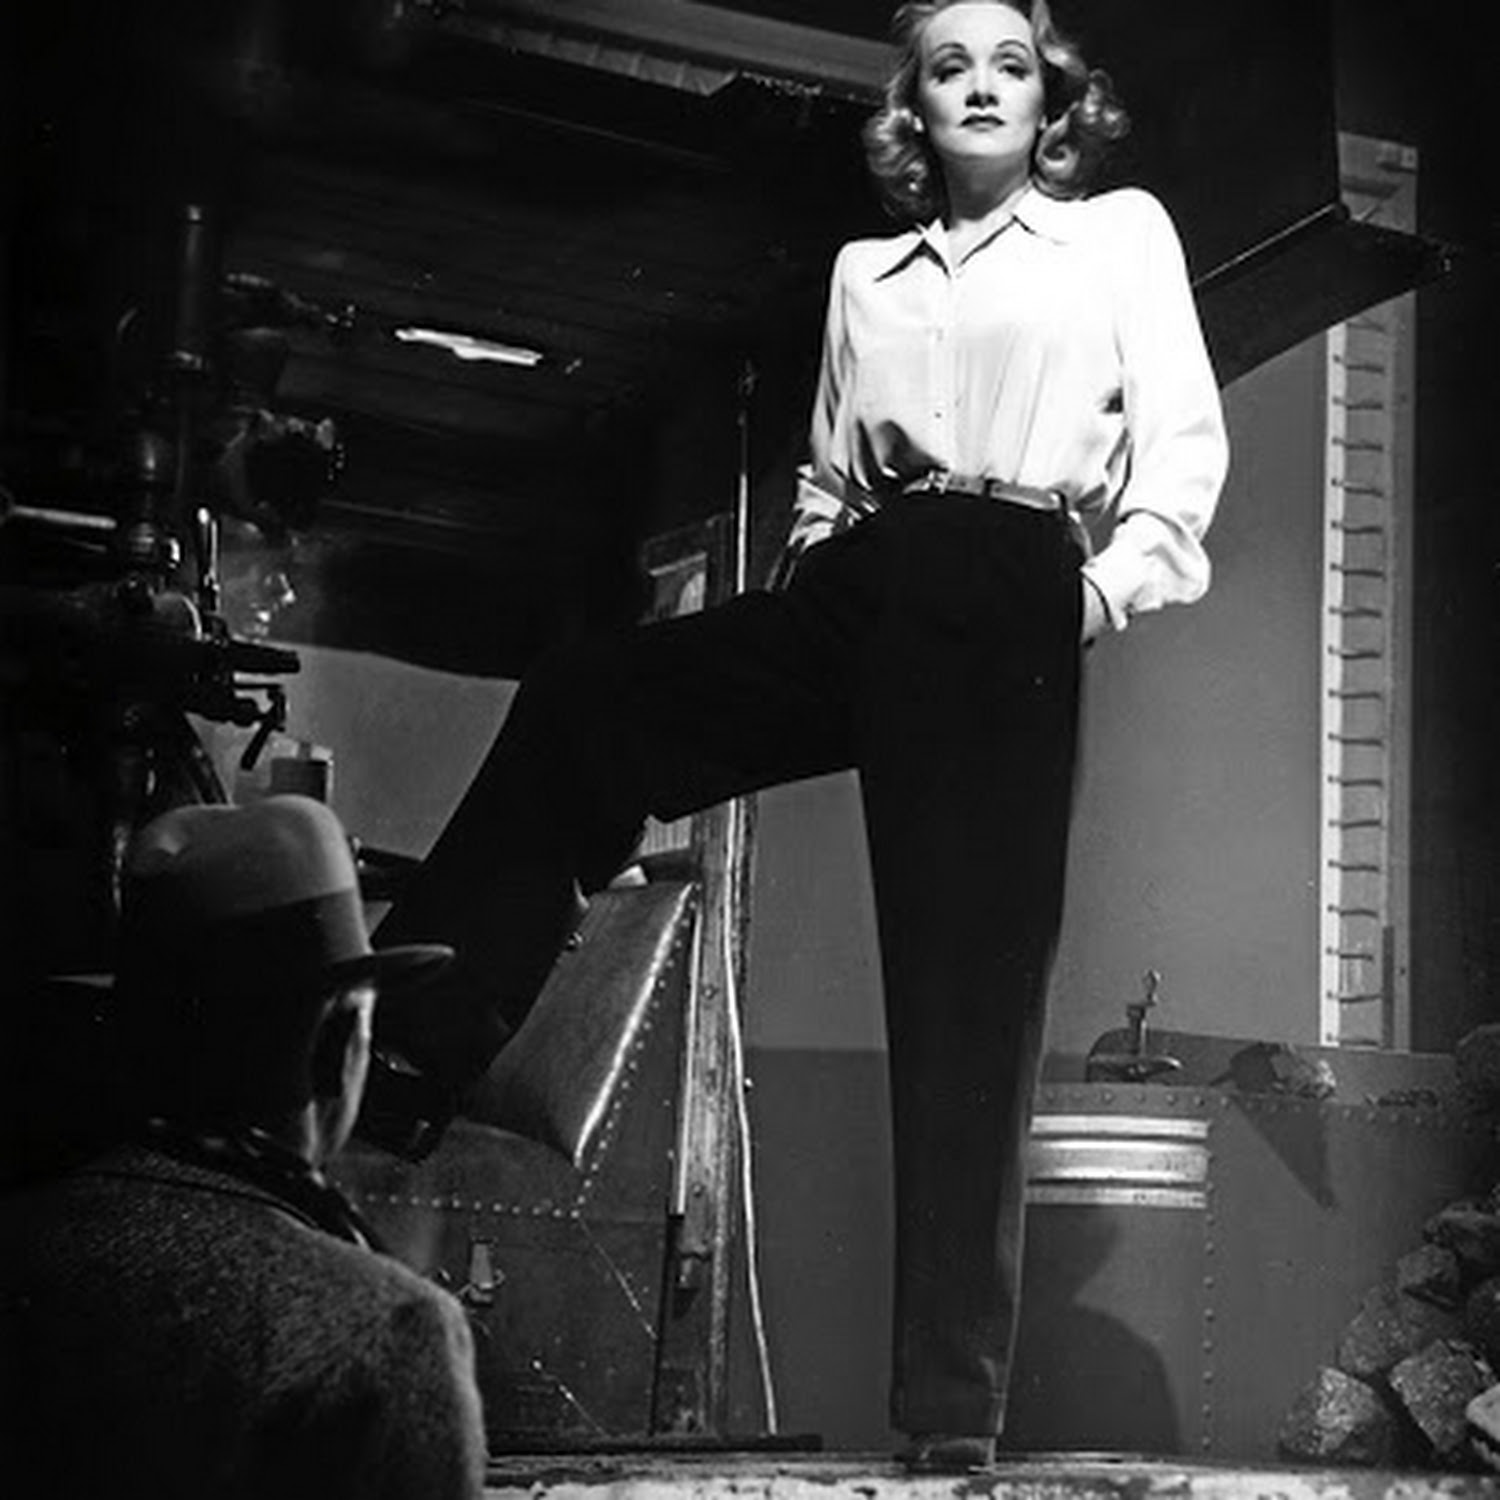 1942: German-born actress Marlene Dietrich (1901 - 1992) wearing a well-cut pair of trousers. (Photo by Laszlo Willinger/John Kobal Foundation/Getty Images)